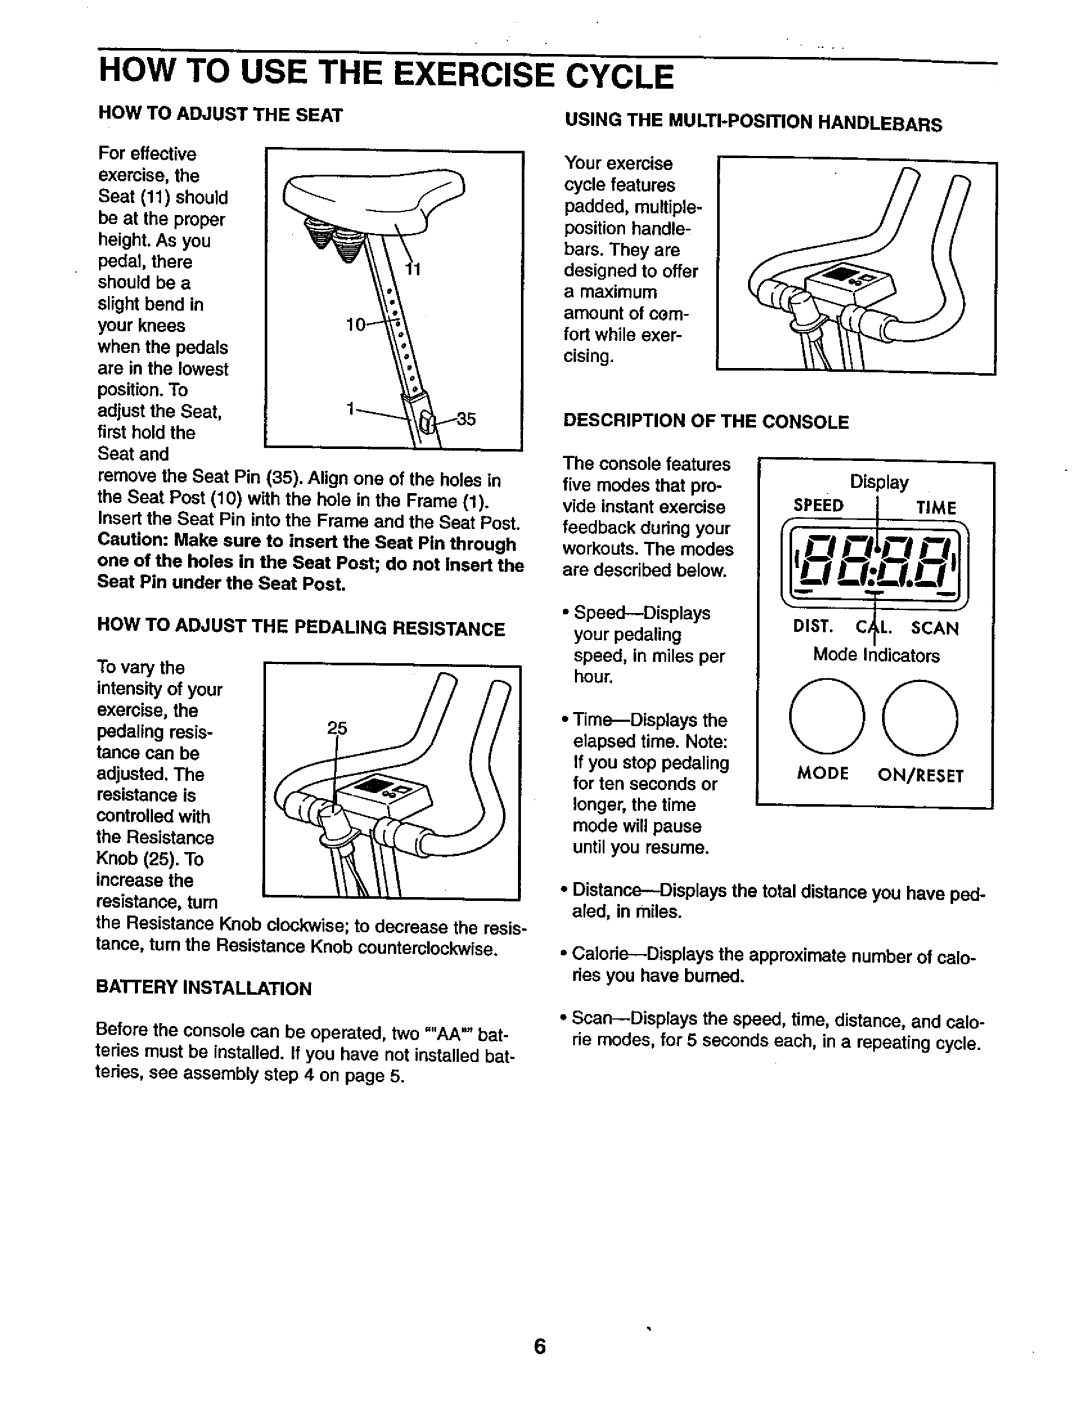 Sears 831.28822 user manual How To Use The Exercise, Cycle, ff,c,c c,o,l, IILr - .LTll, T --U 